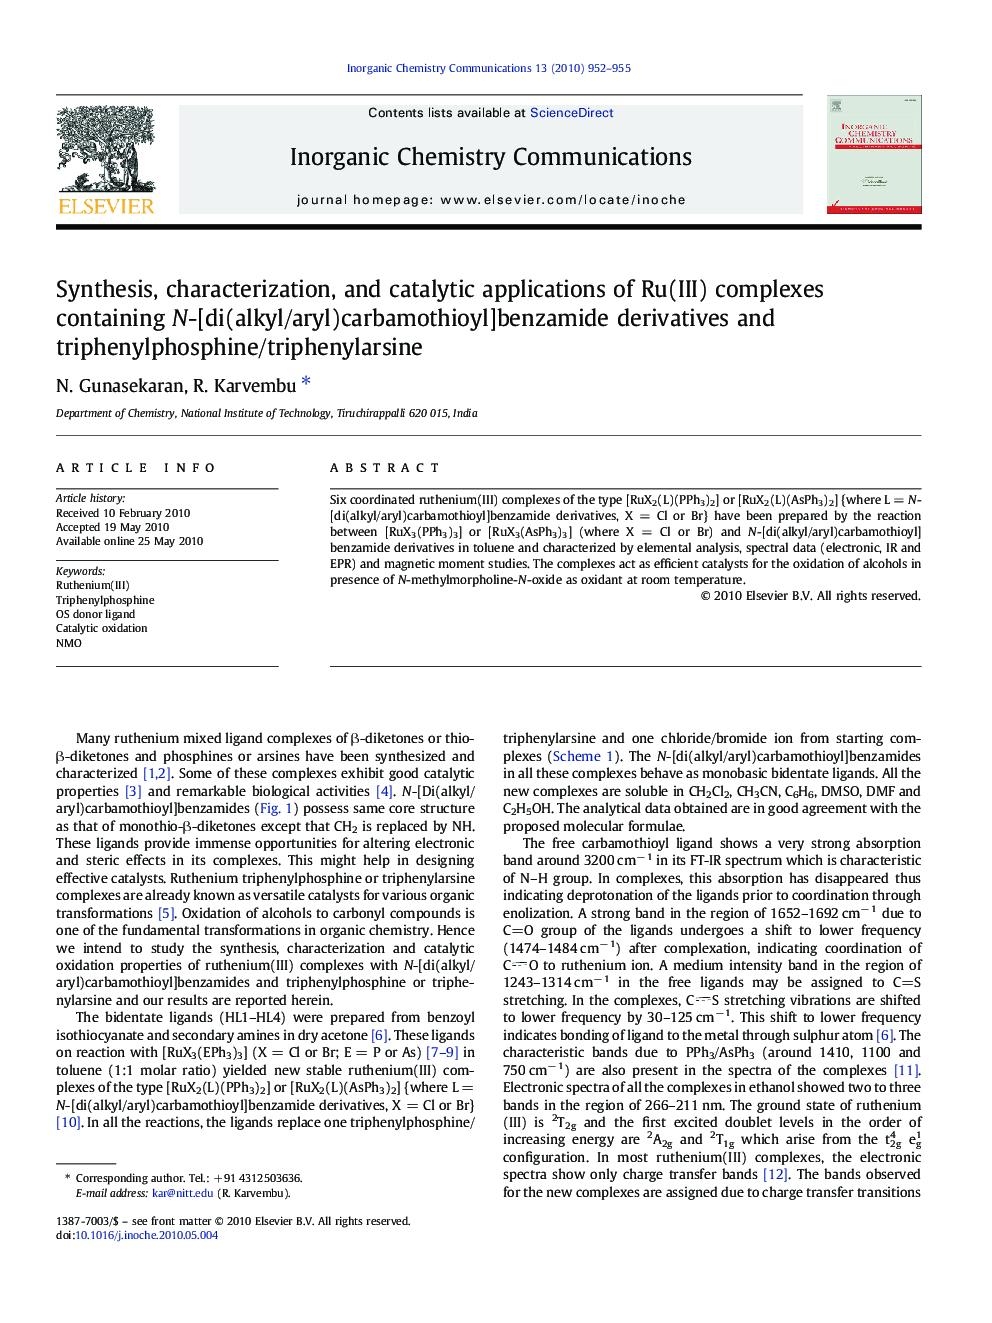 Synthesis, characterization, and catalytic applications of Ru(III) complexes containing N-[di(alkyl/aryl)carbamothioyl]benzamide derivatives and triphenylphosphine/triphenylarsine